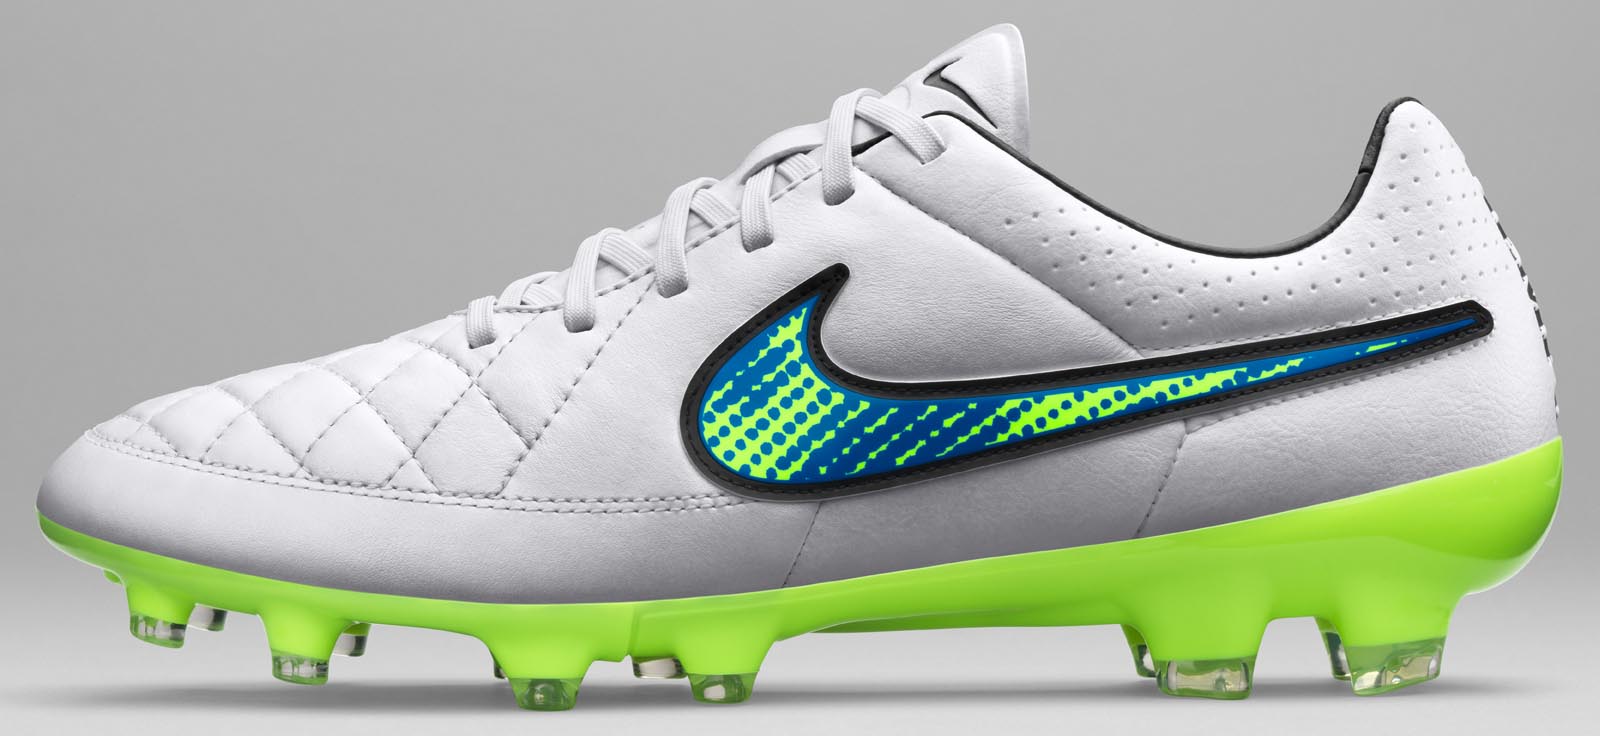 image For > Nike Football Cleats 2015